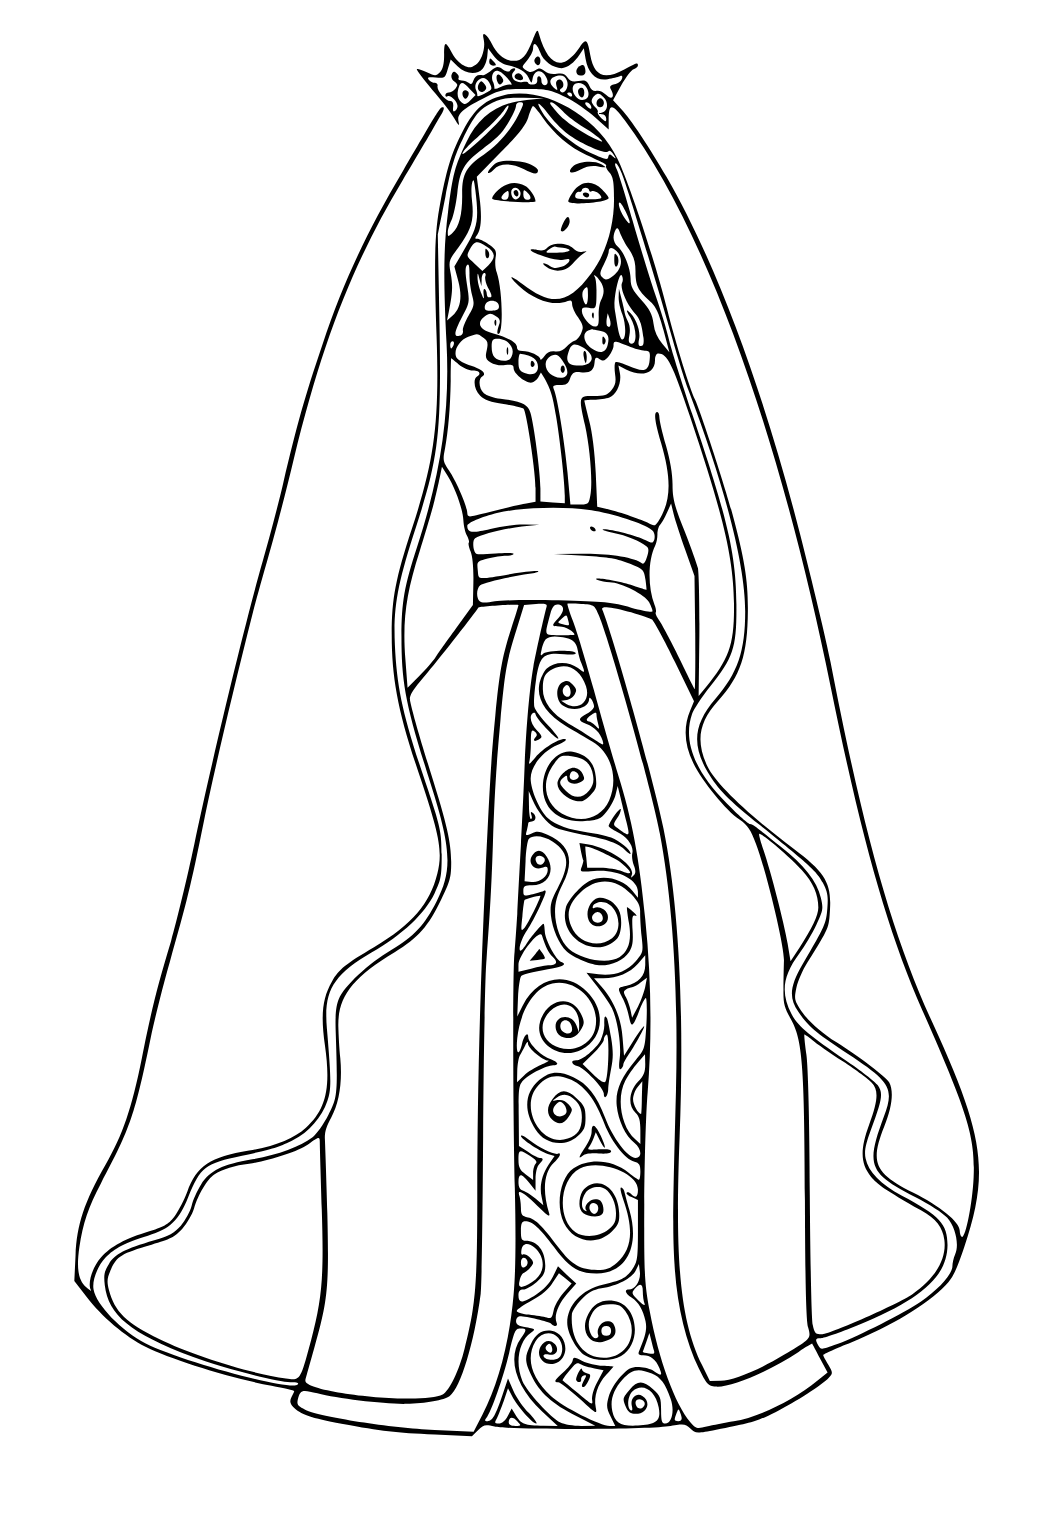 Free printable queen dress coloring page for adults and kids